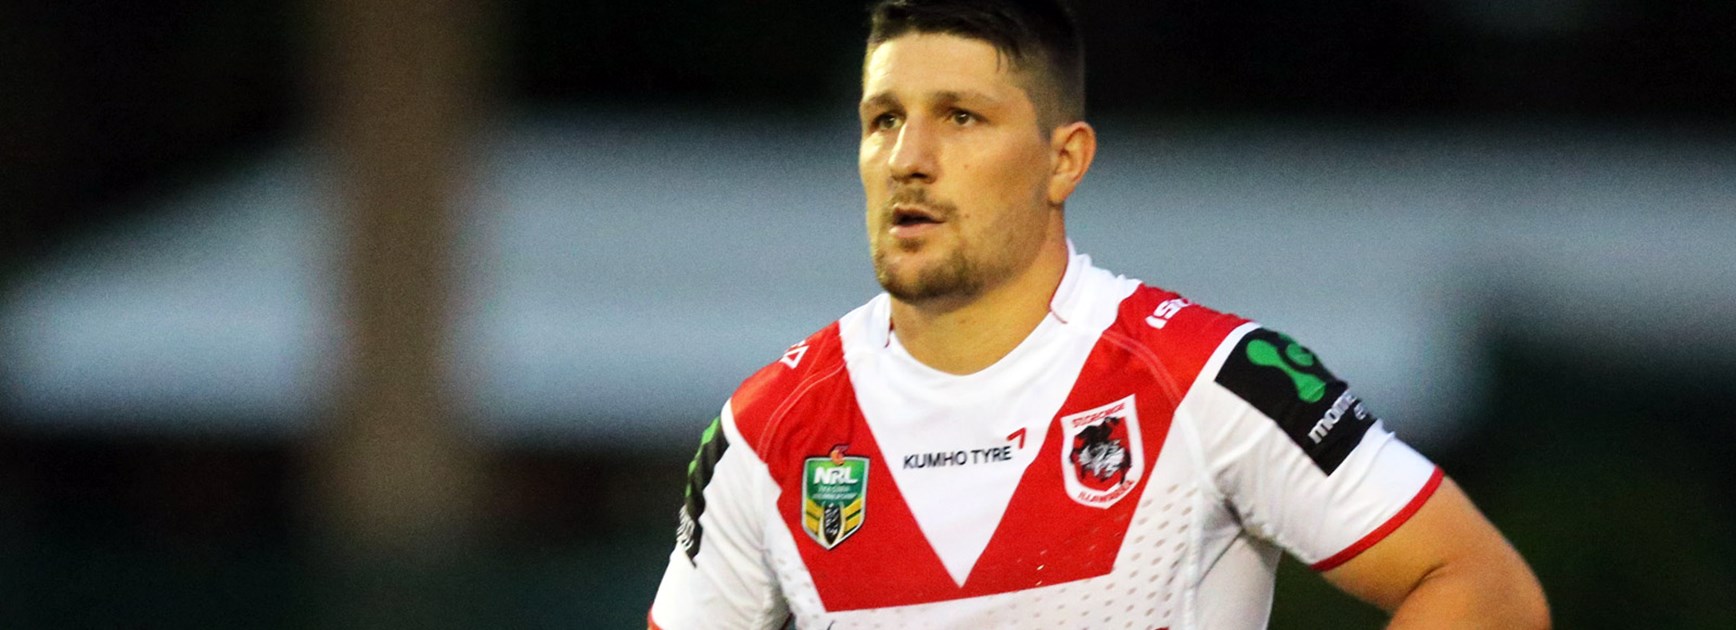 Dragons playmaker Gareth Widdop is keen to work with Wayne Bennett as part of the World All Stars squad.